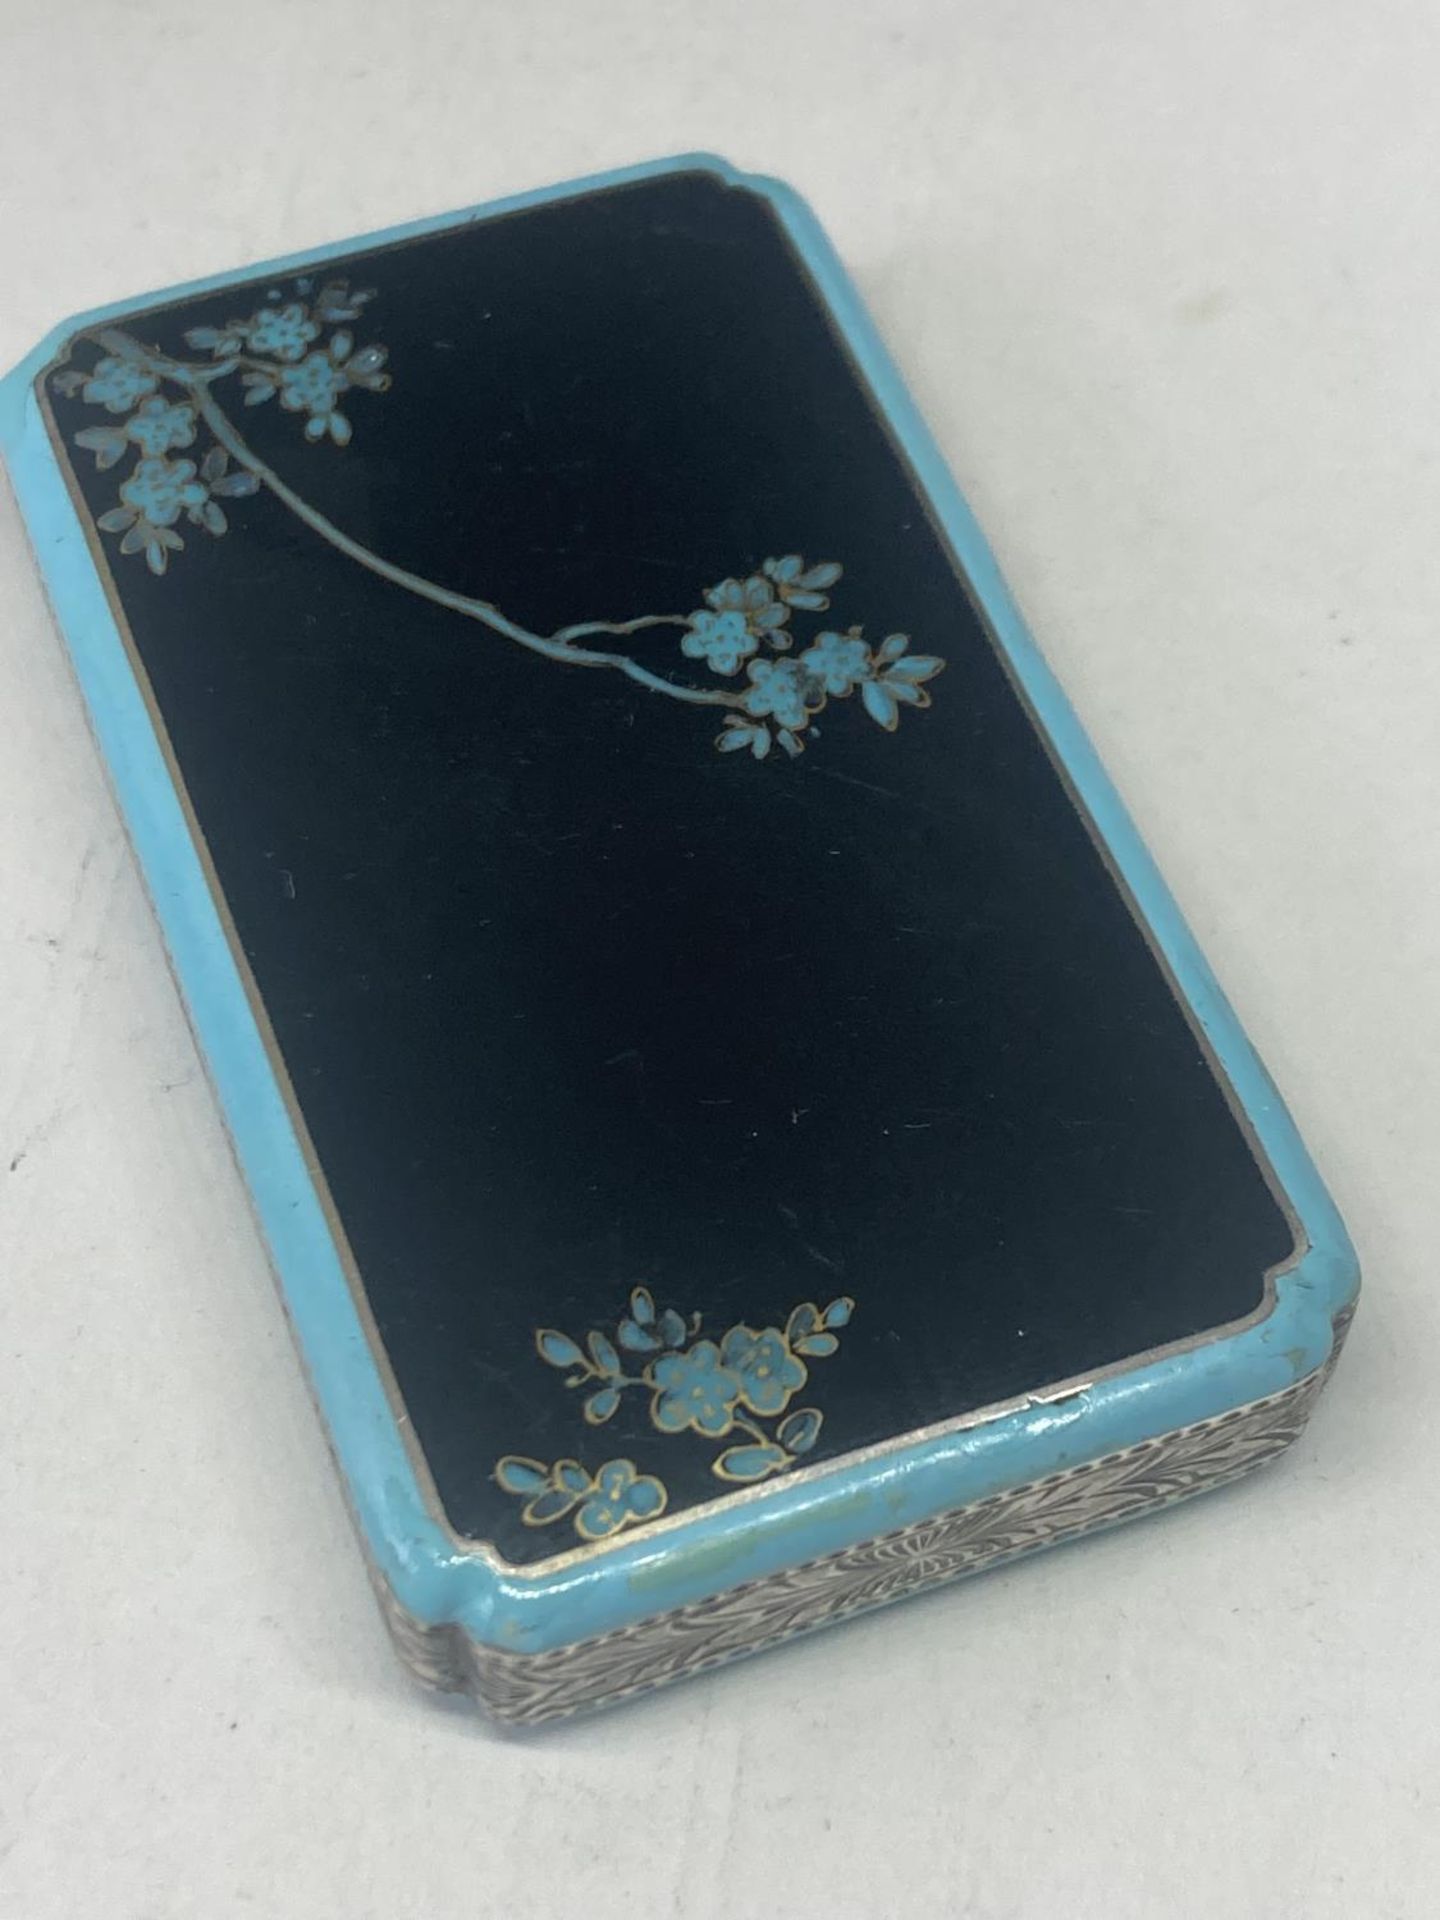 A SILVER AND ENAMEL TRINKET BOX WITH A TURQUOISE BLUE AND BLACK ORIENTAL BIRD DECORATION - Image 3 of 8